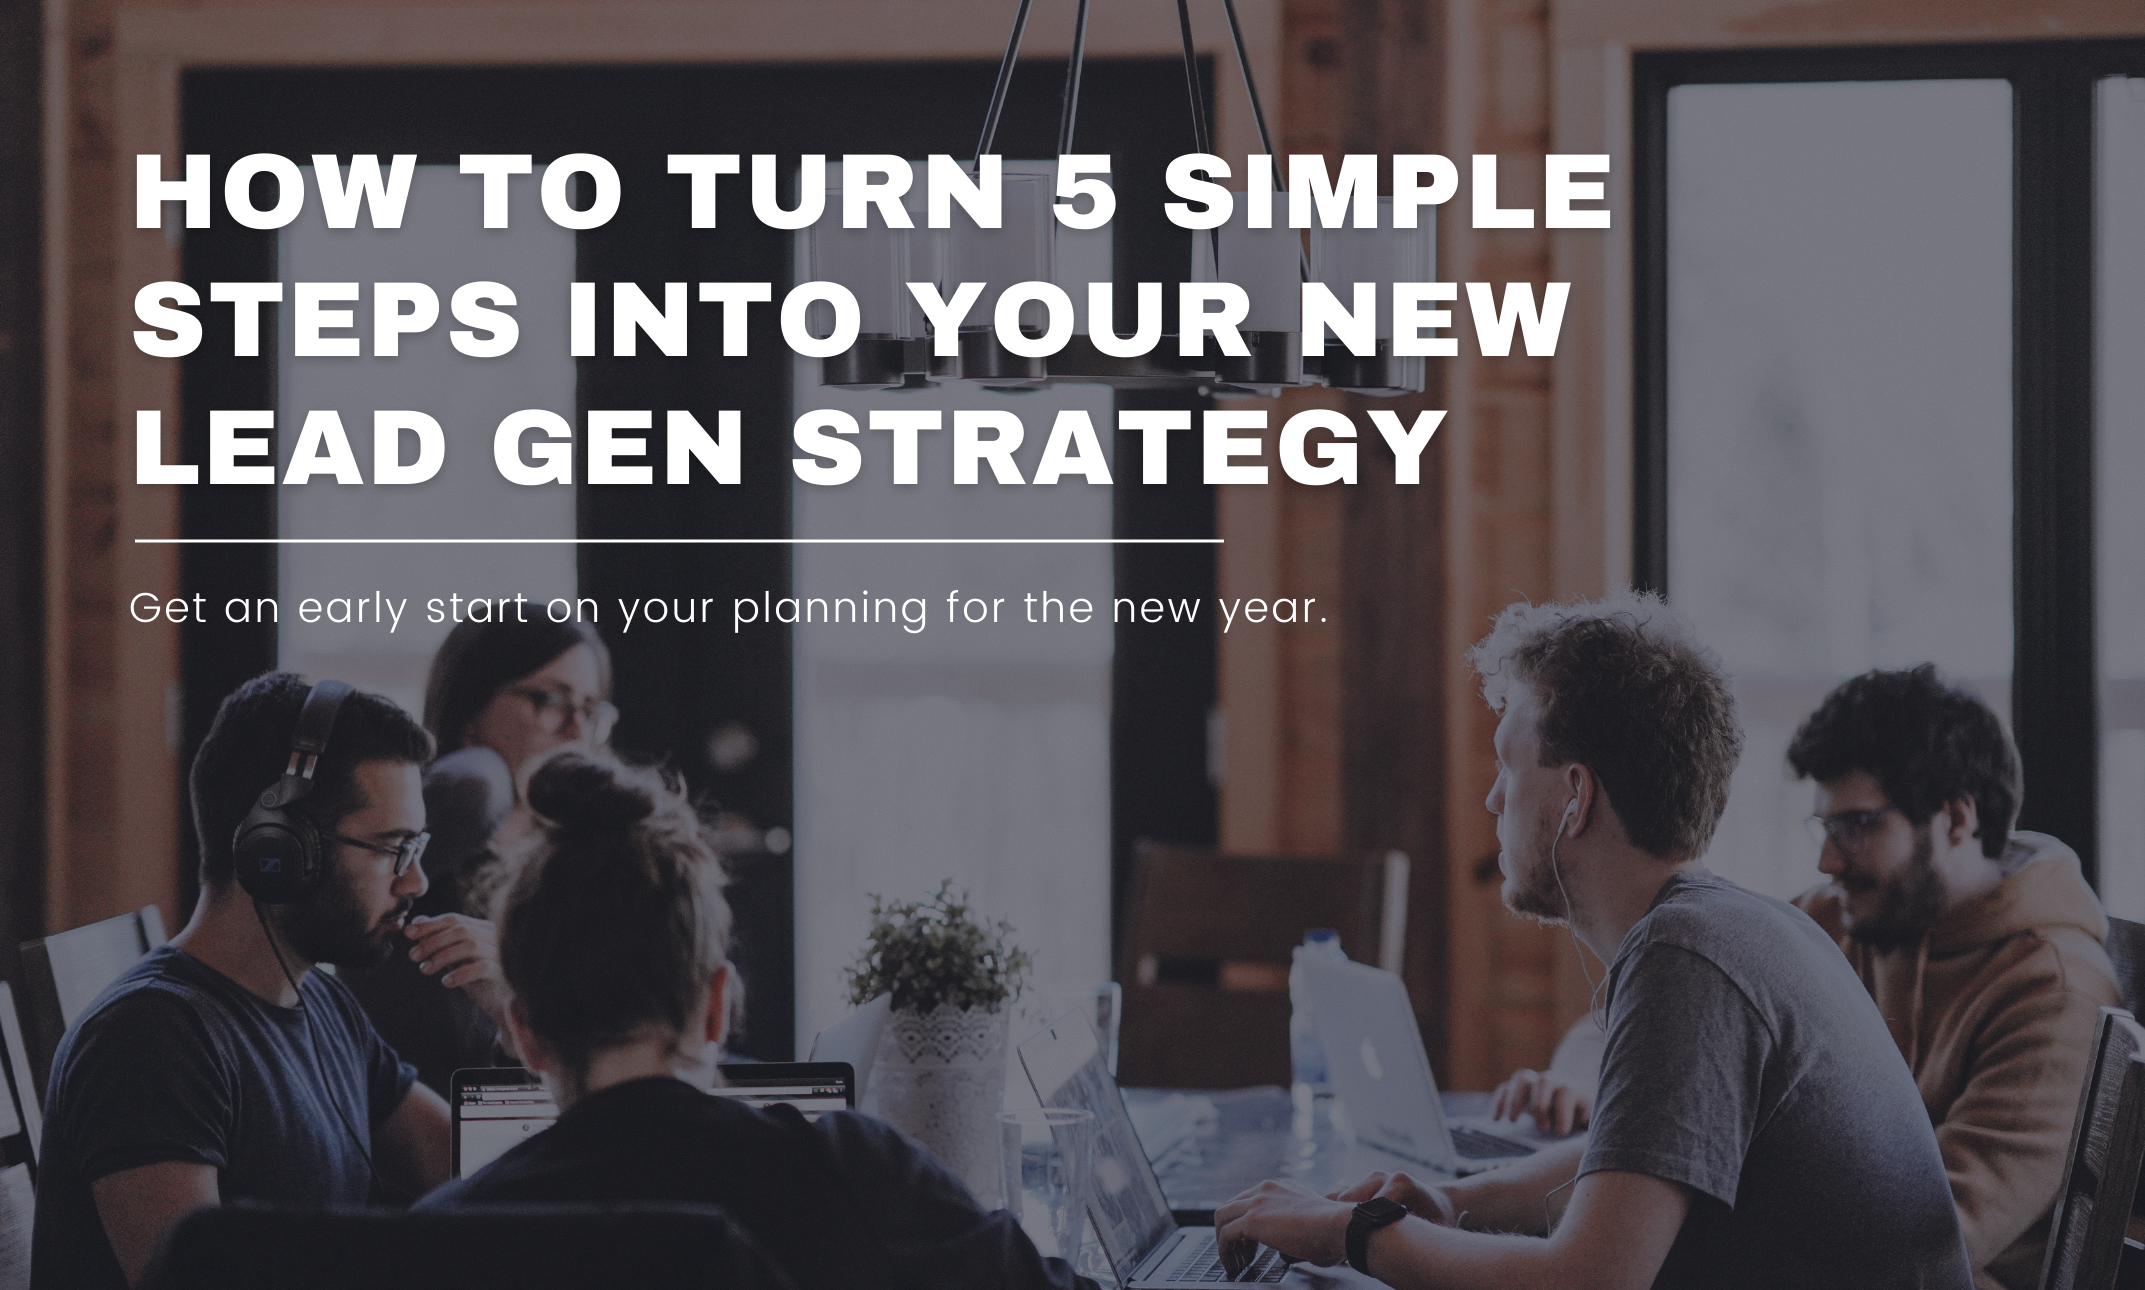 How to turn 5 simple steps into your new lead gen strategy